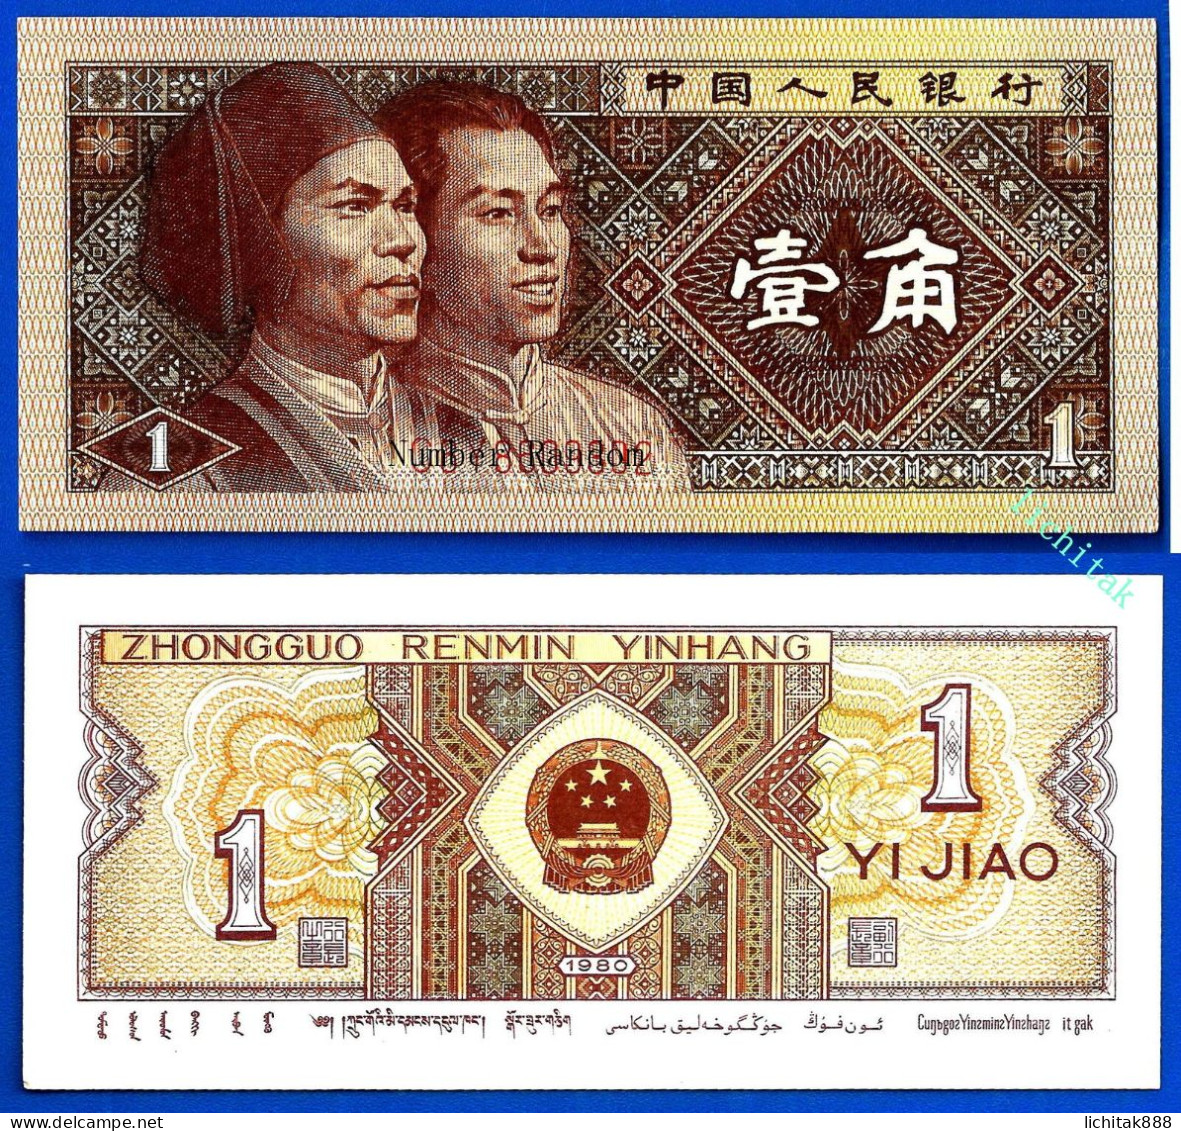 1980 CHINA Peoples Republic 1 Jiao Banknote UNC  Number Random - Chine